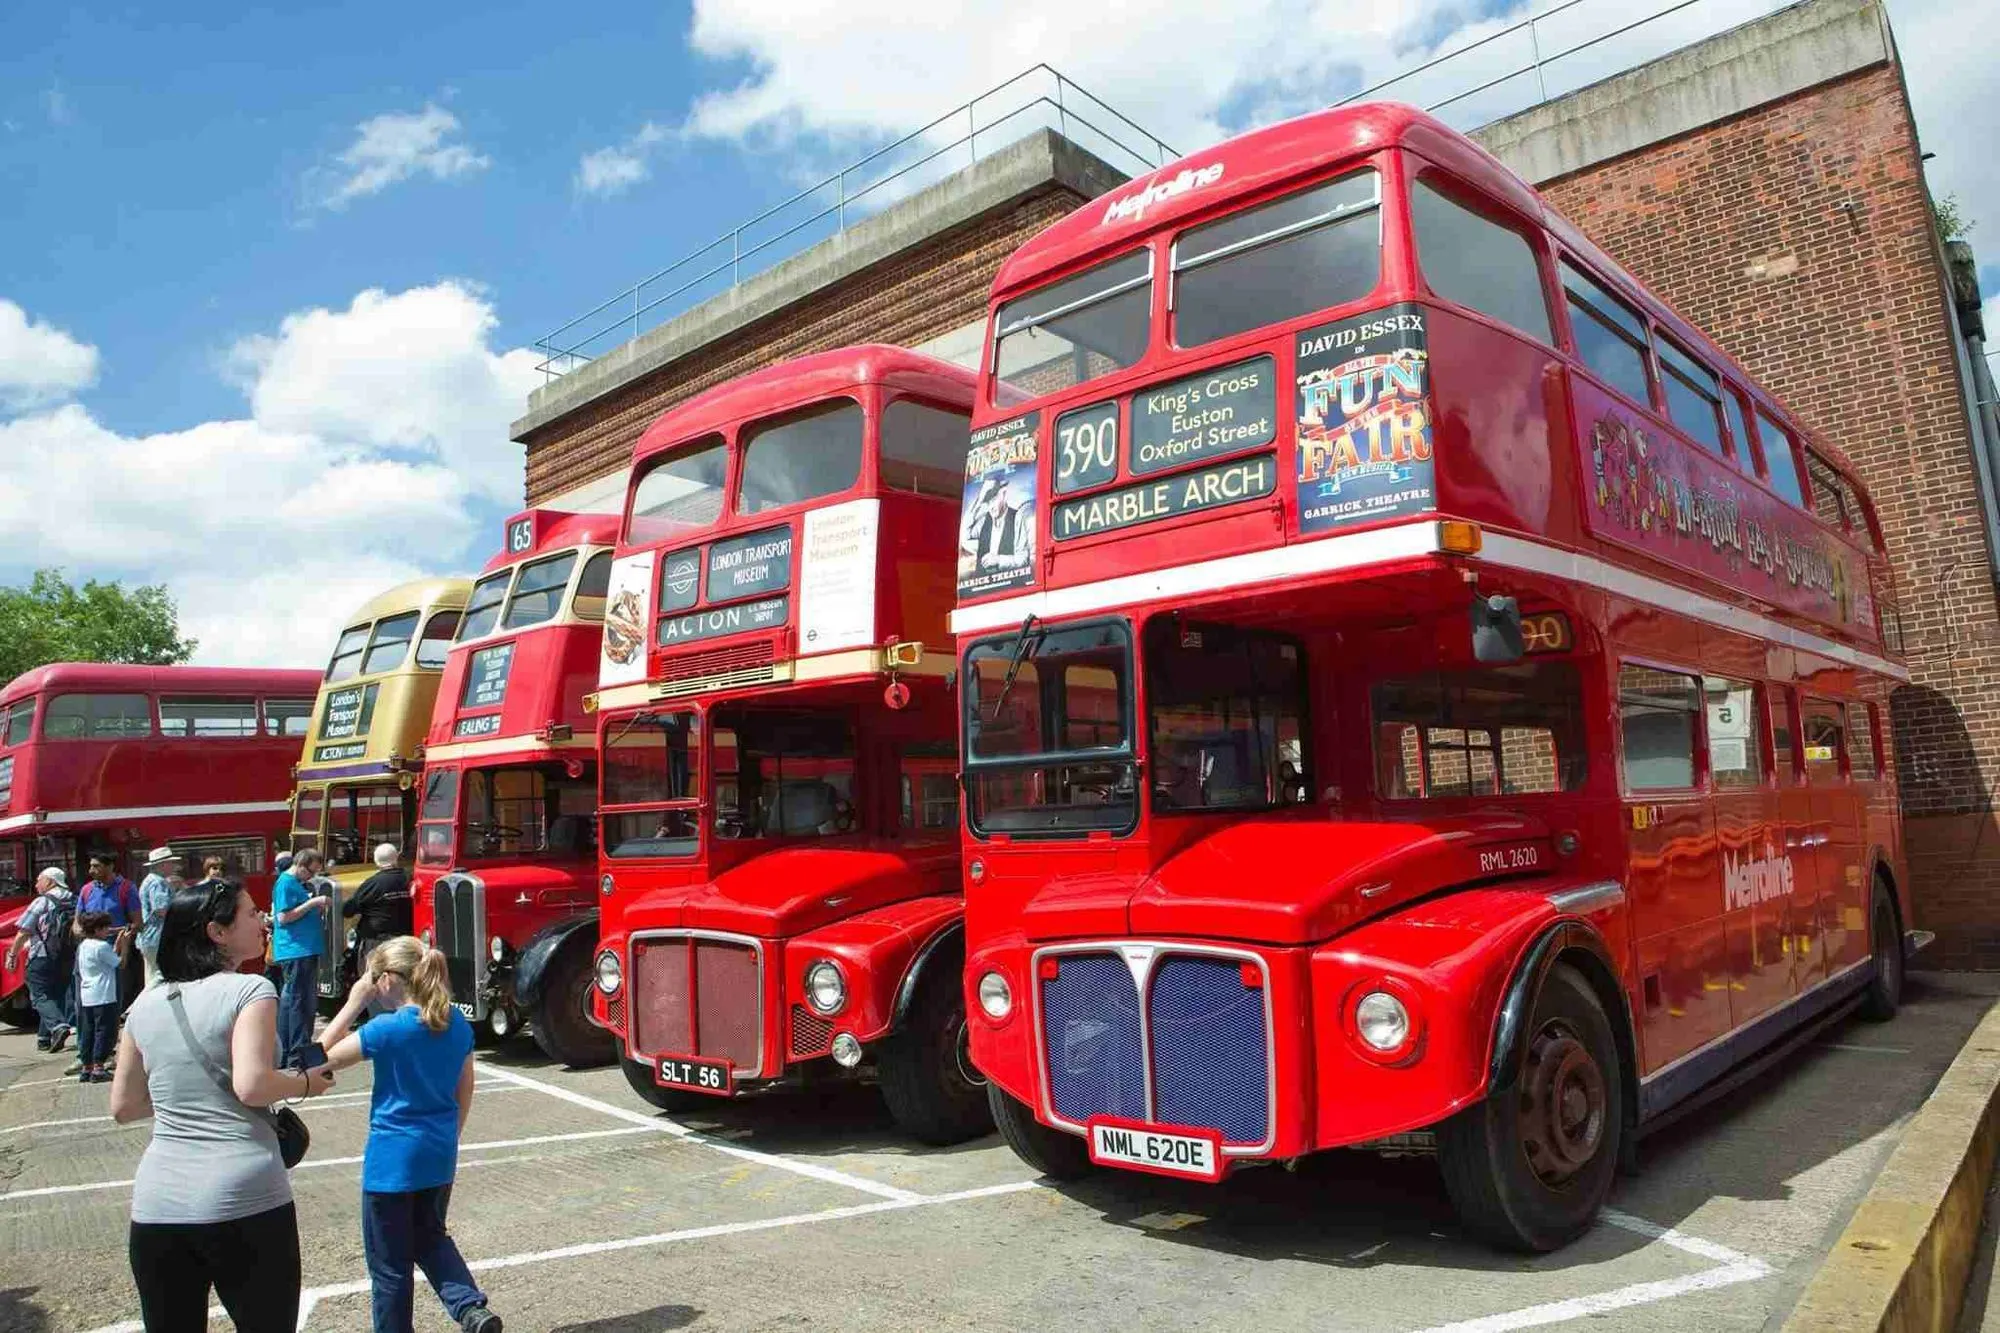 An audio guide will help you discover all the key facts about London on this tour. Book London Discovery Bus Tour tickets.